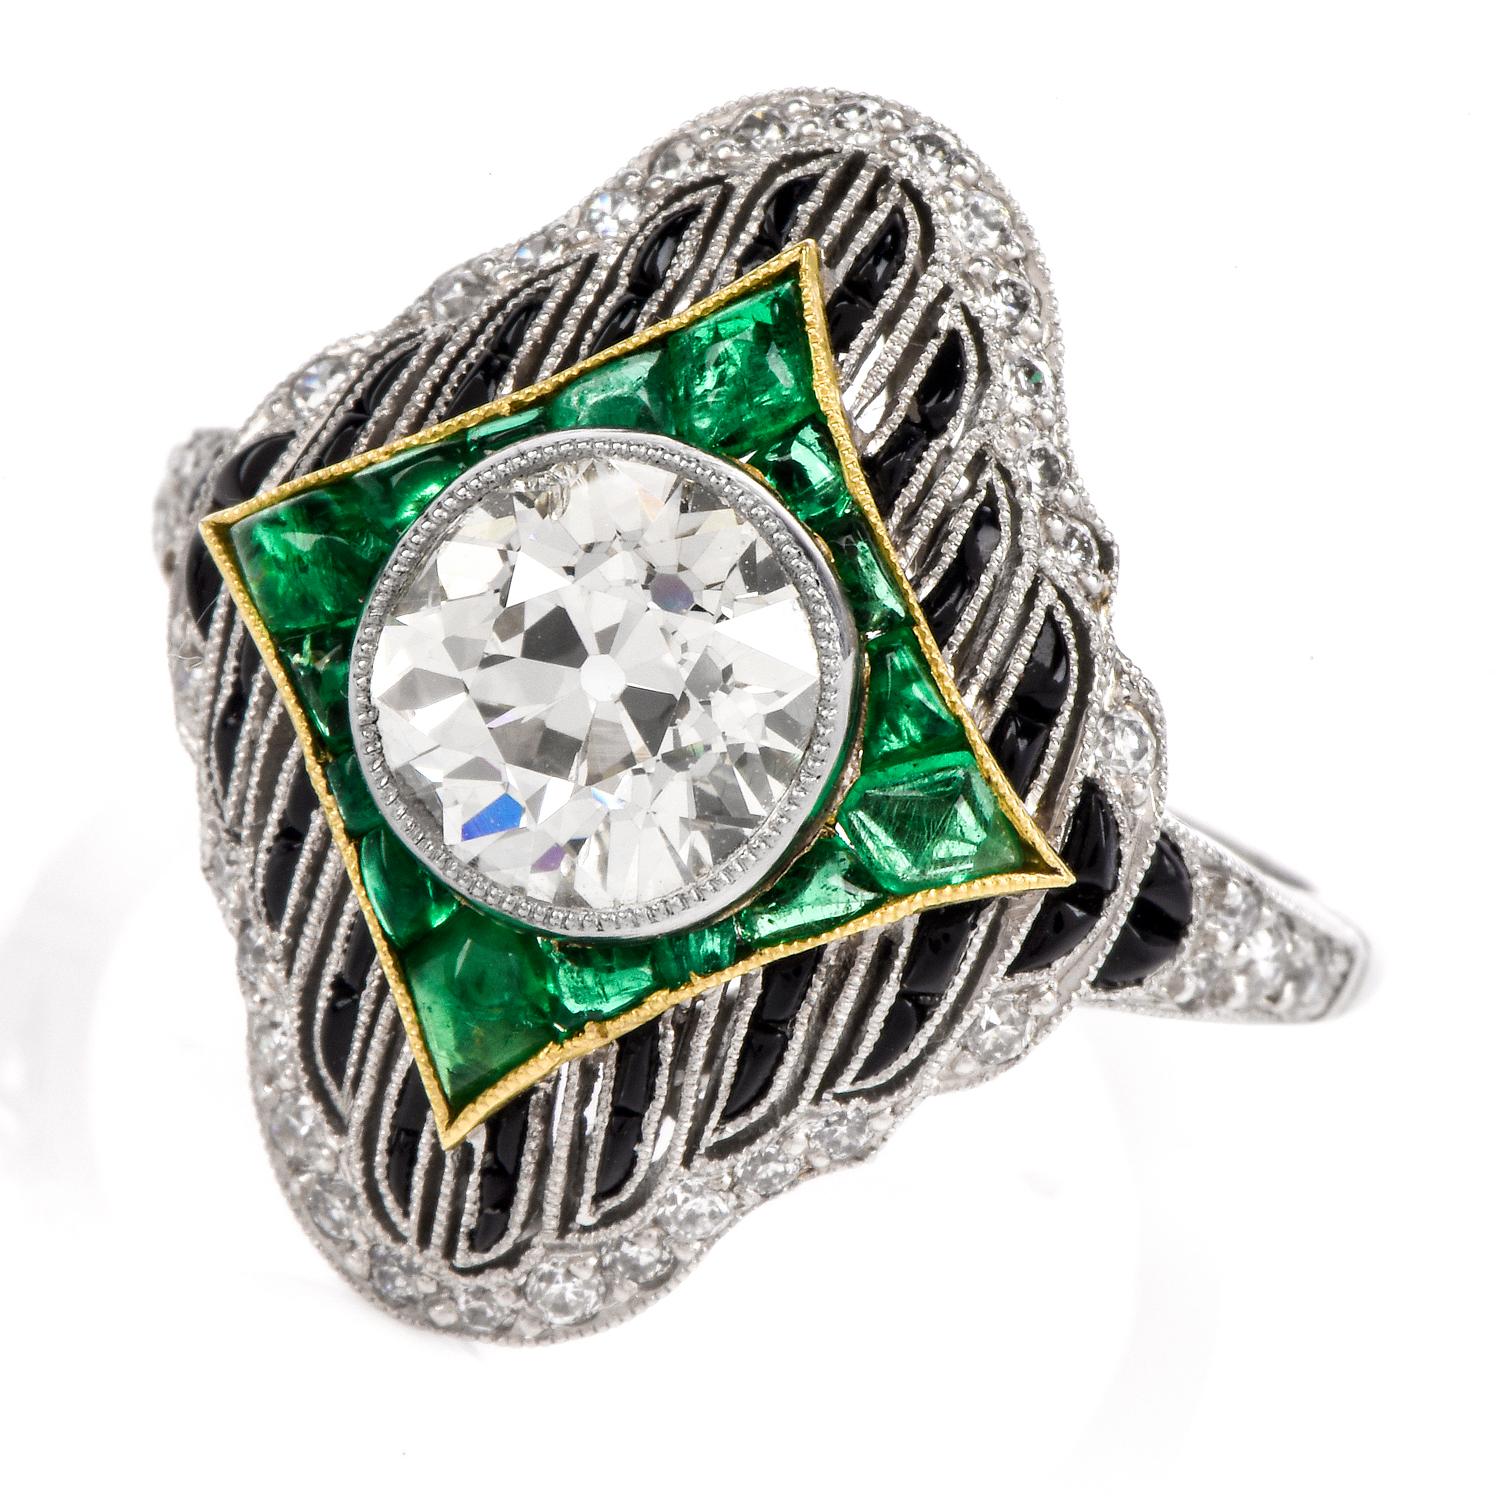 this vintage  stunning diamond, emerald, and onyx ring is crafted in solid platinum. Showcasing a prominent bezel-set round old European-cut diamond weighing approx. 1.66 carats, graded I-J color, and VS1 clarity. Surrounded by a kite shaped frame